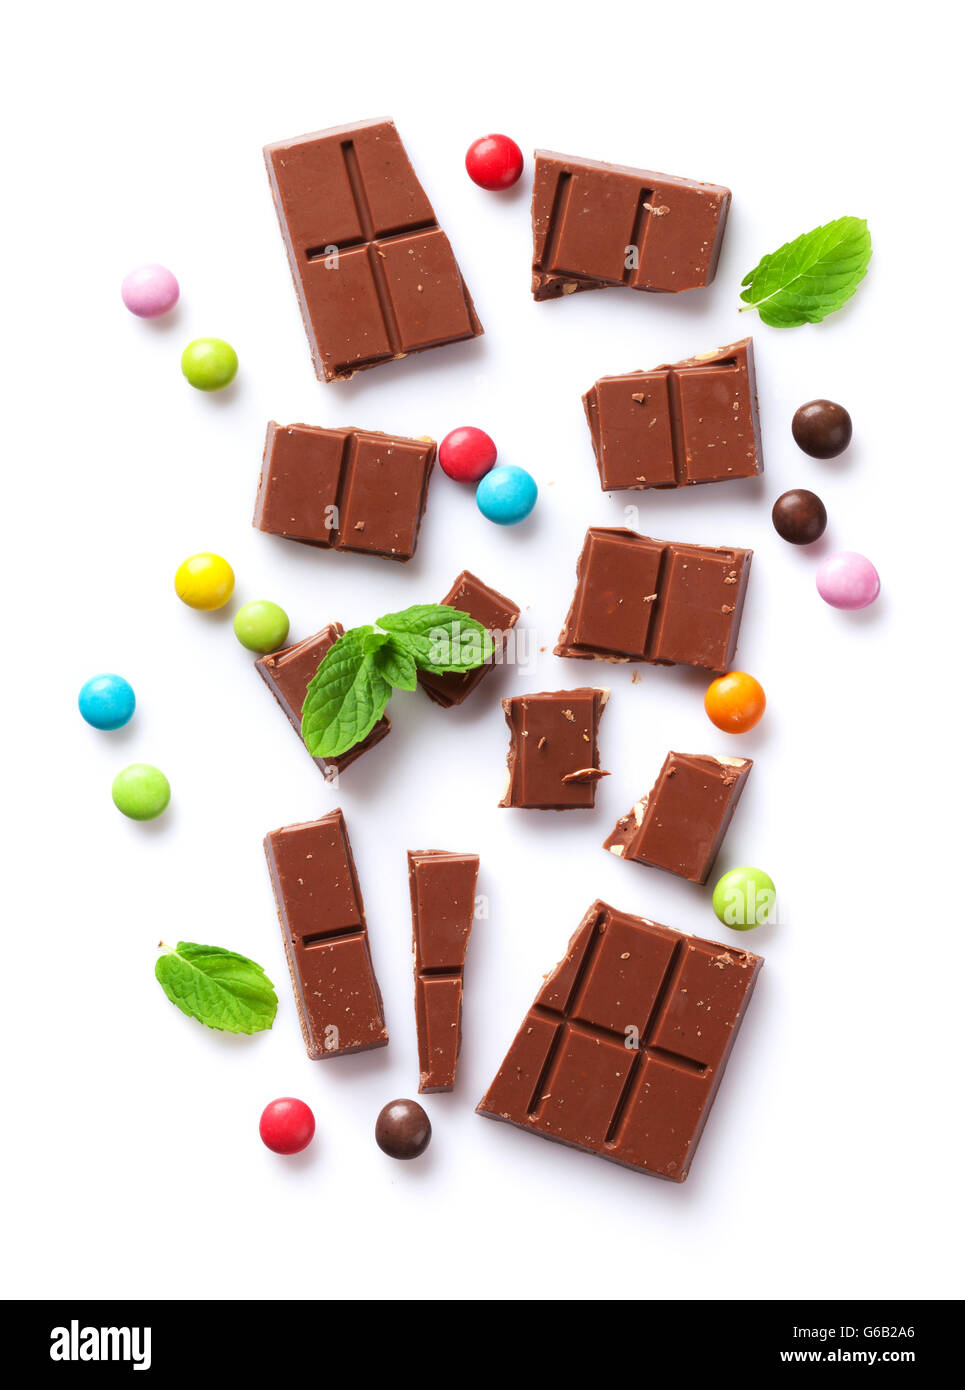 Broken chocolate bar and colorful candy sweets. Isolated on white background.  Top view Stock Photo - Alamy